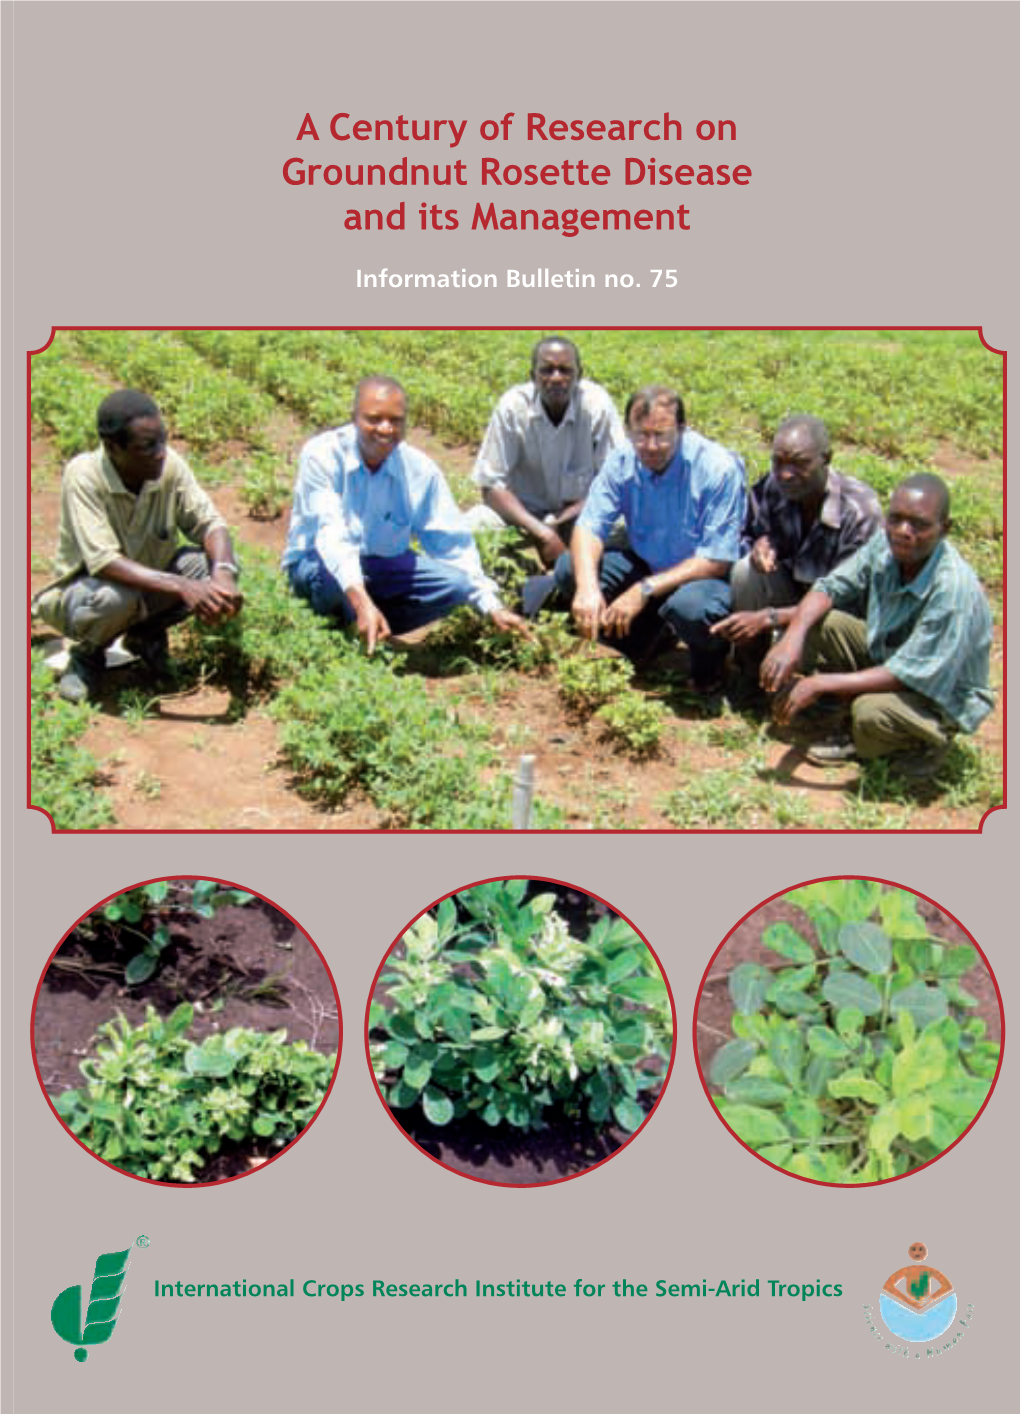 A Century of Research on Groundnut Rosette Disease and Its Management